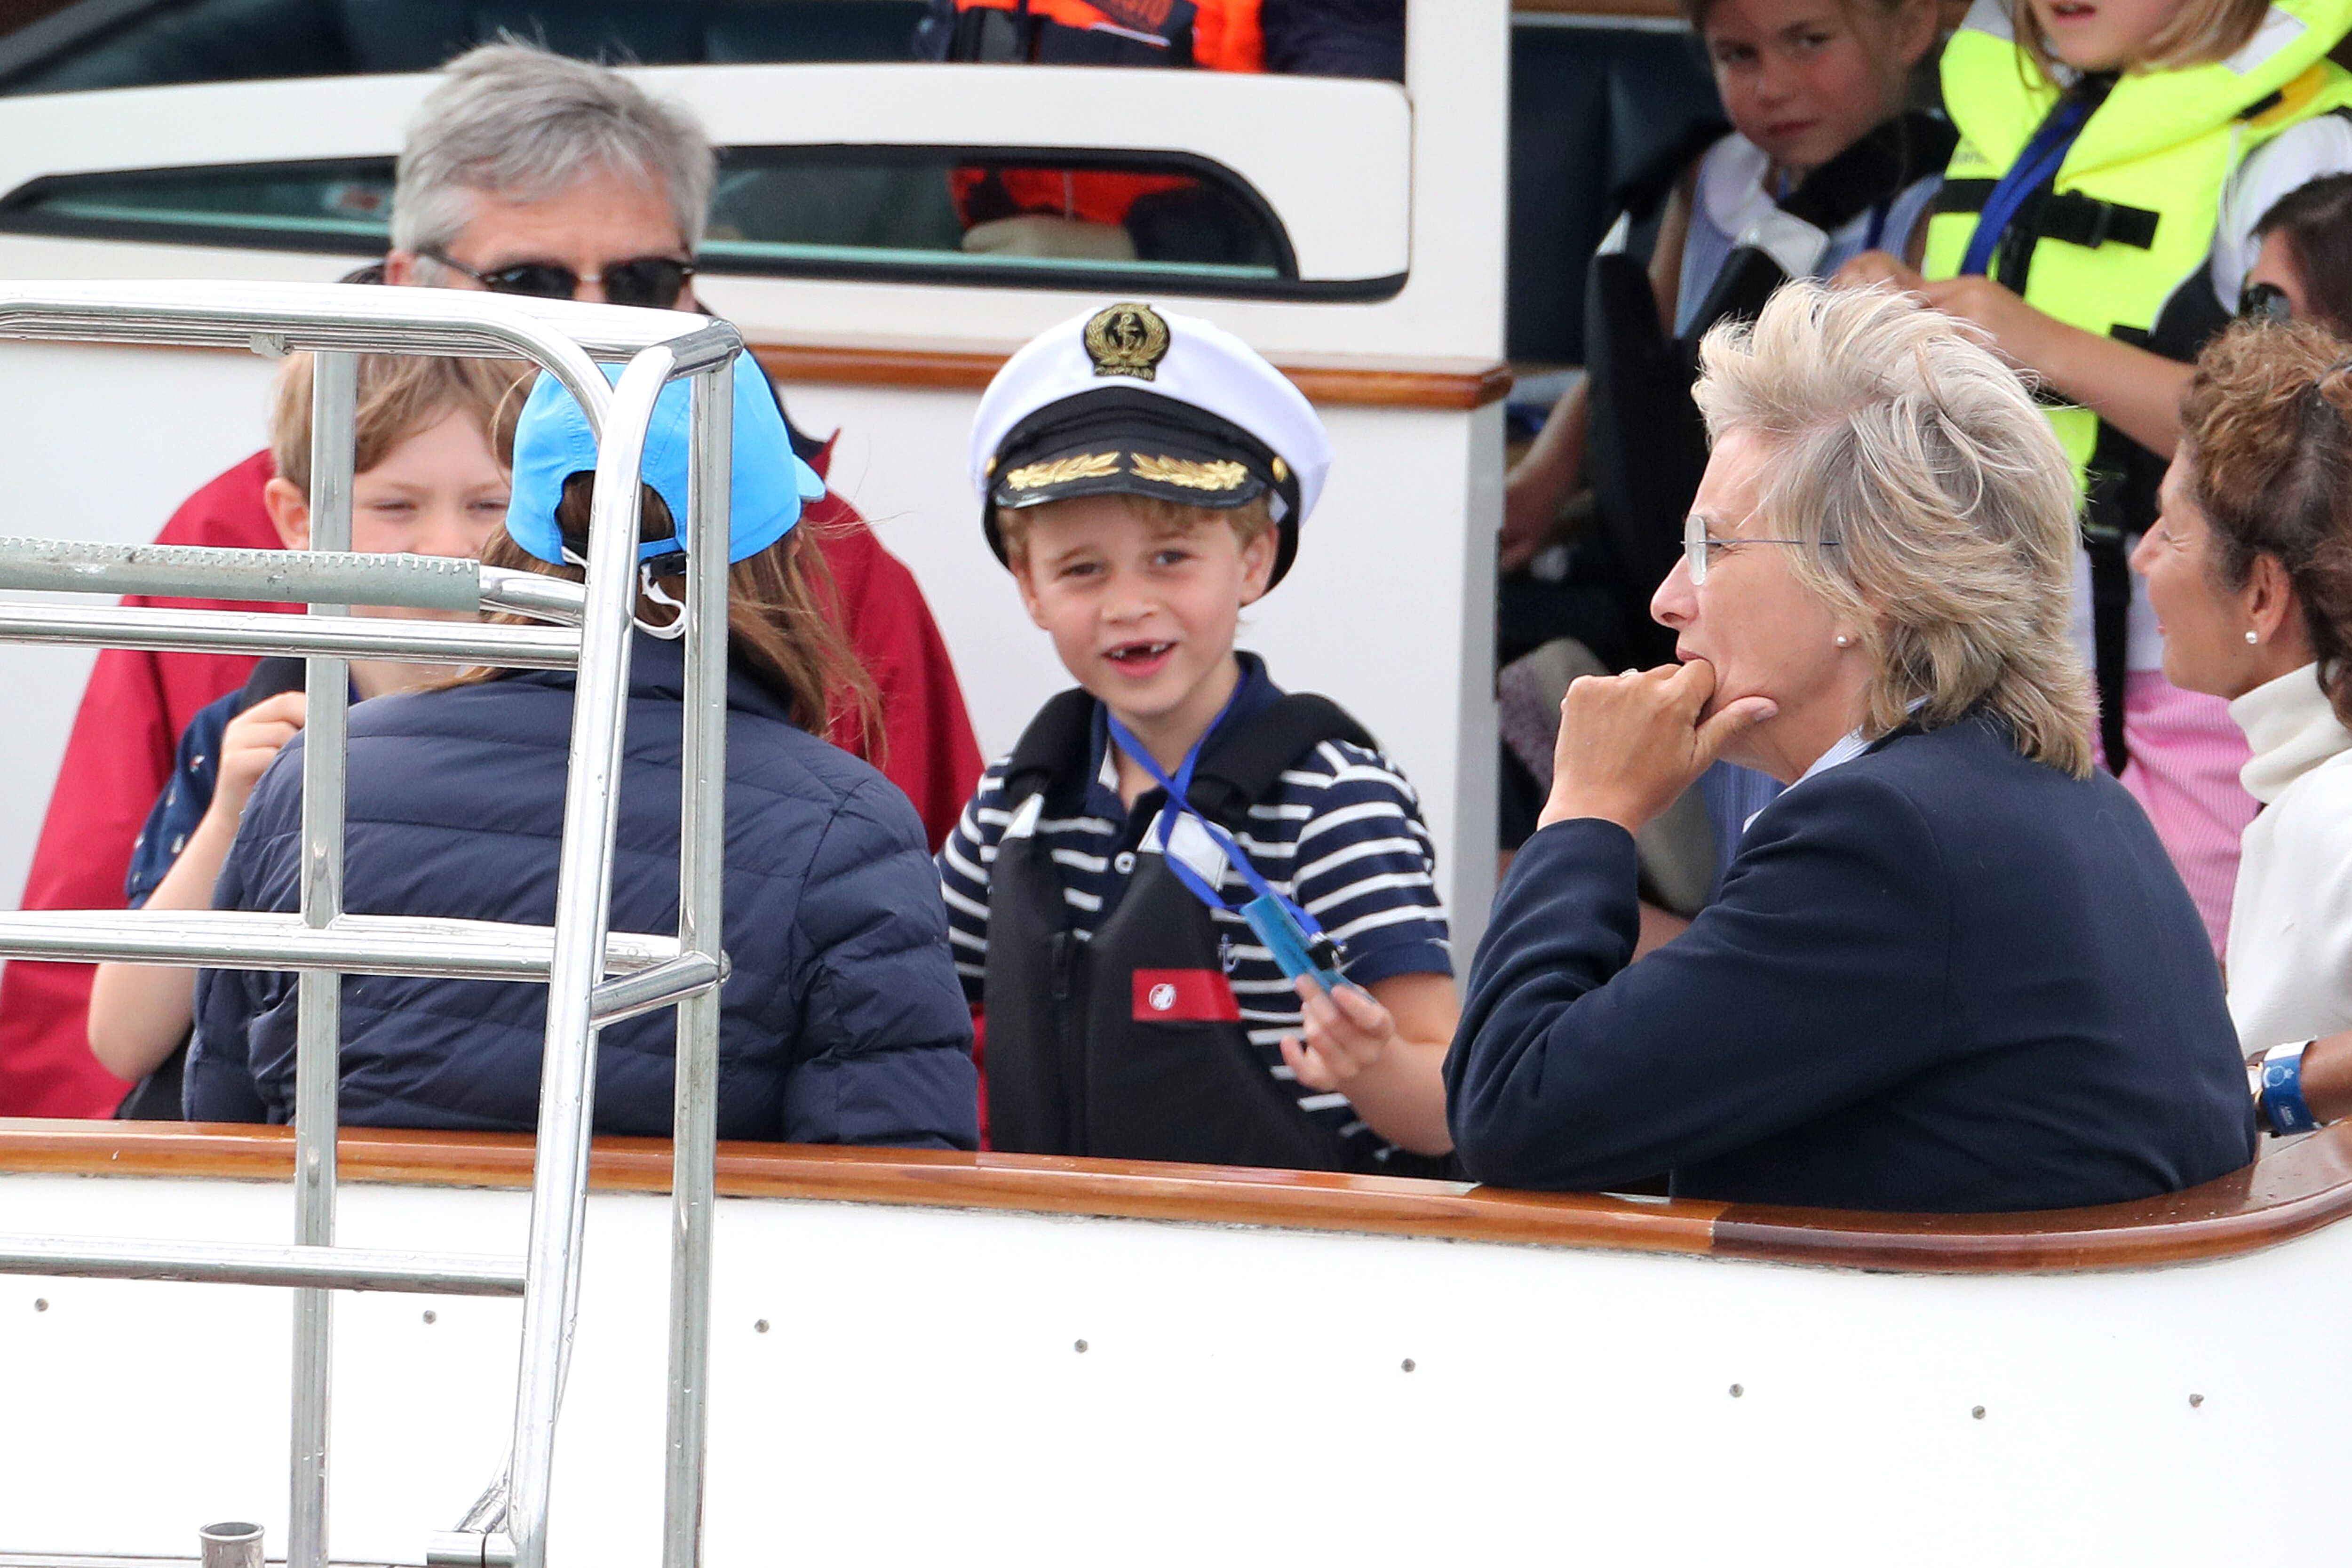 Prince George at the King's Cup charity race. | Source: Getty Images